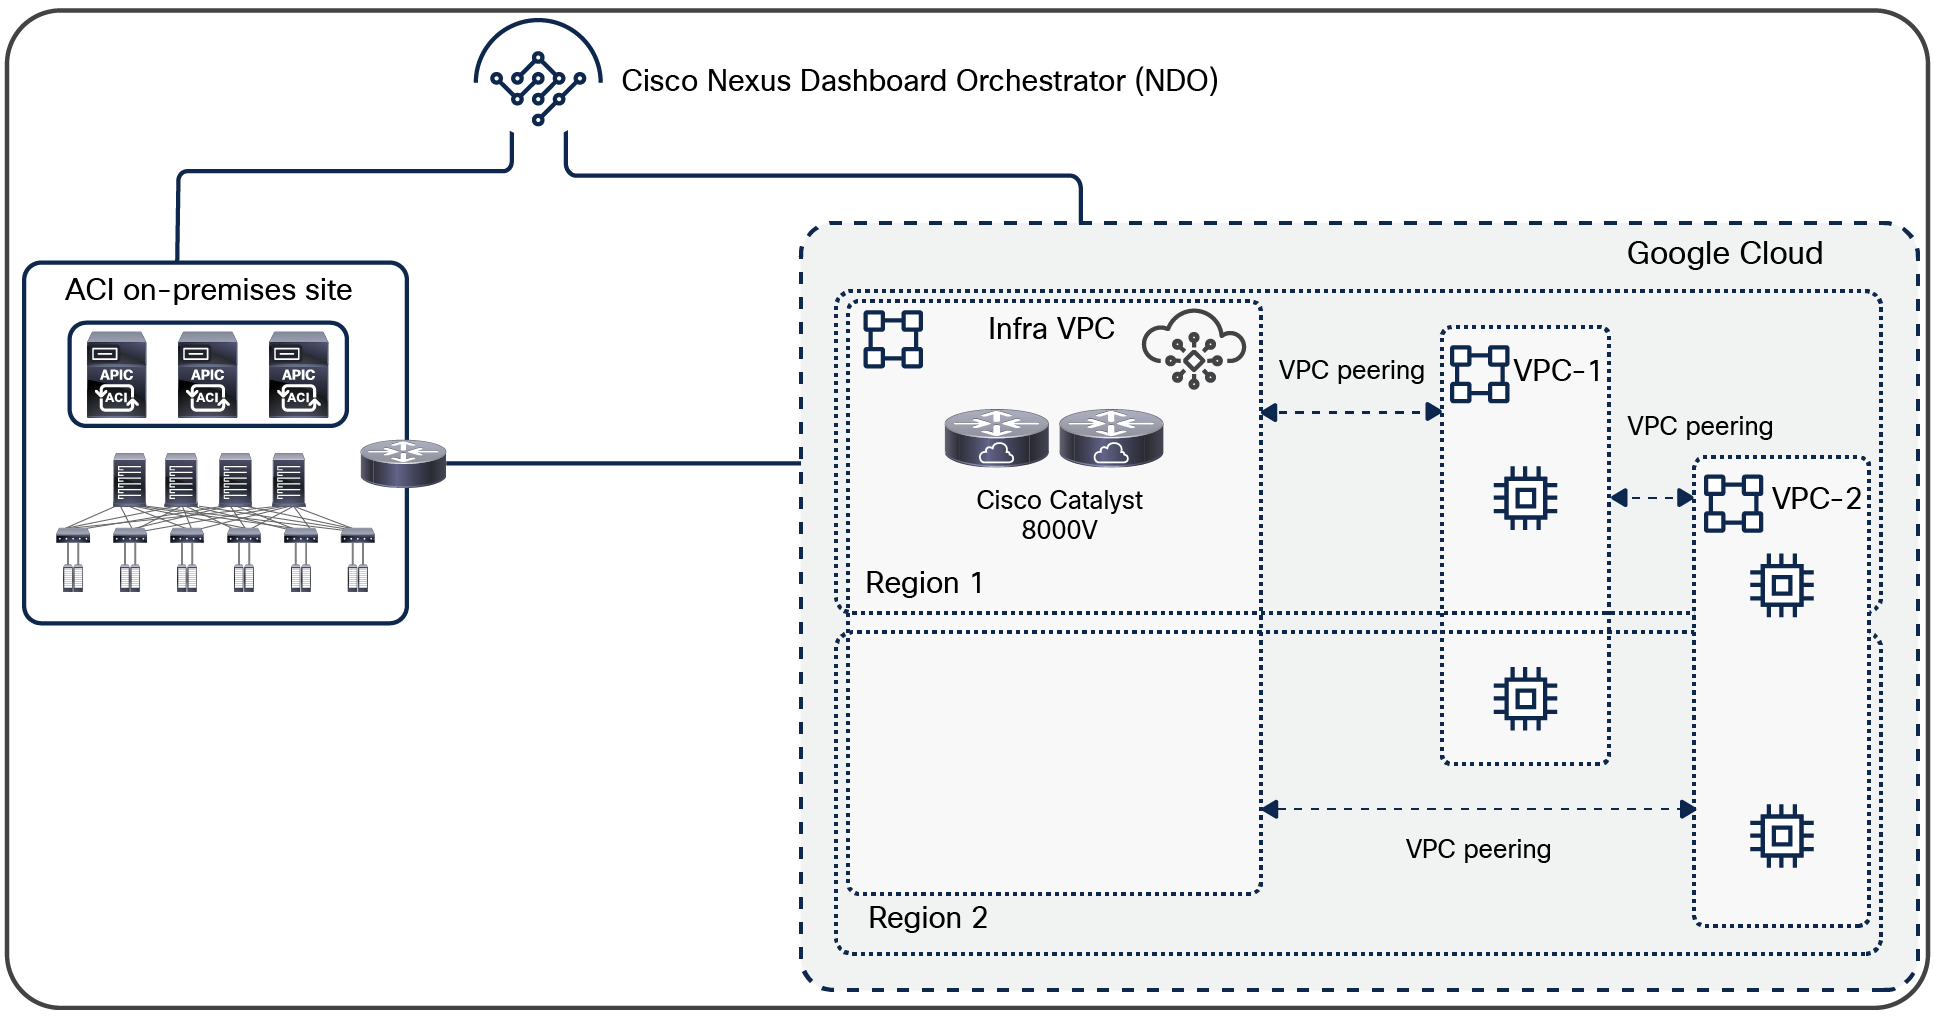 Cisco Multi-Cloud Networking solution: GCP multi-region site with cloud routers in the same region